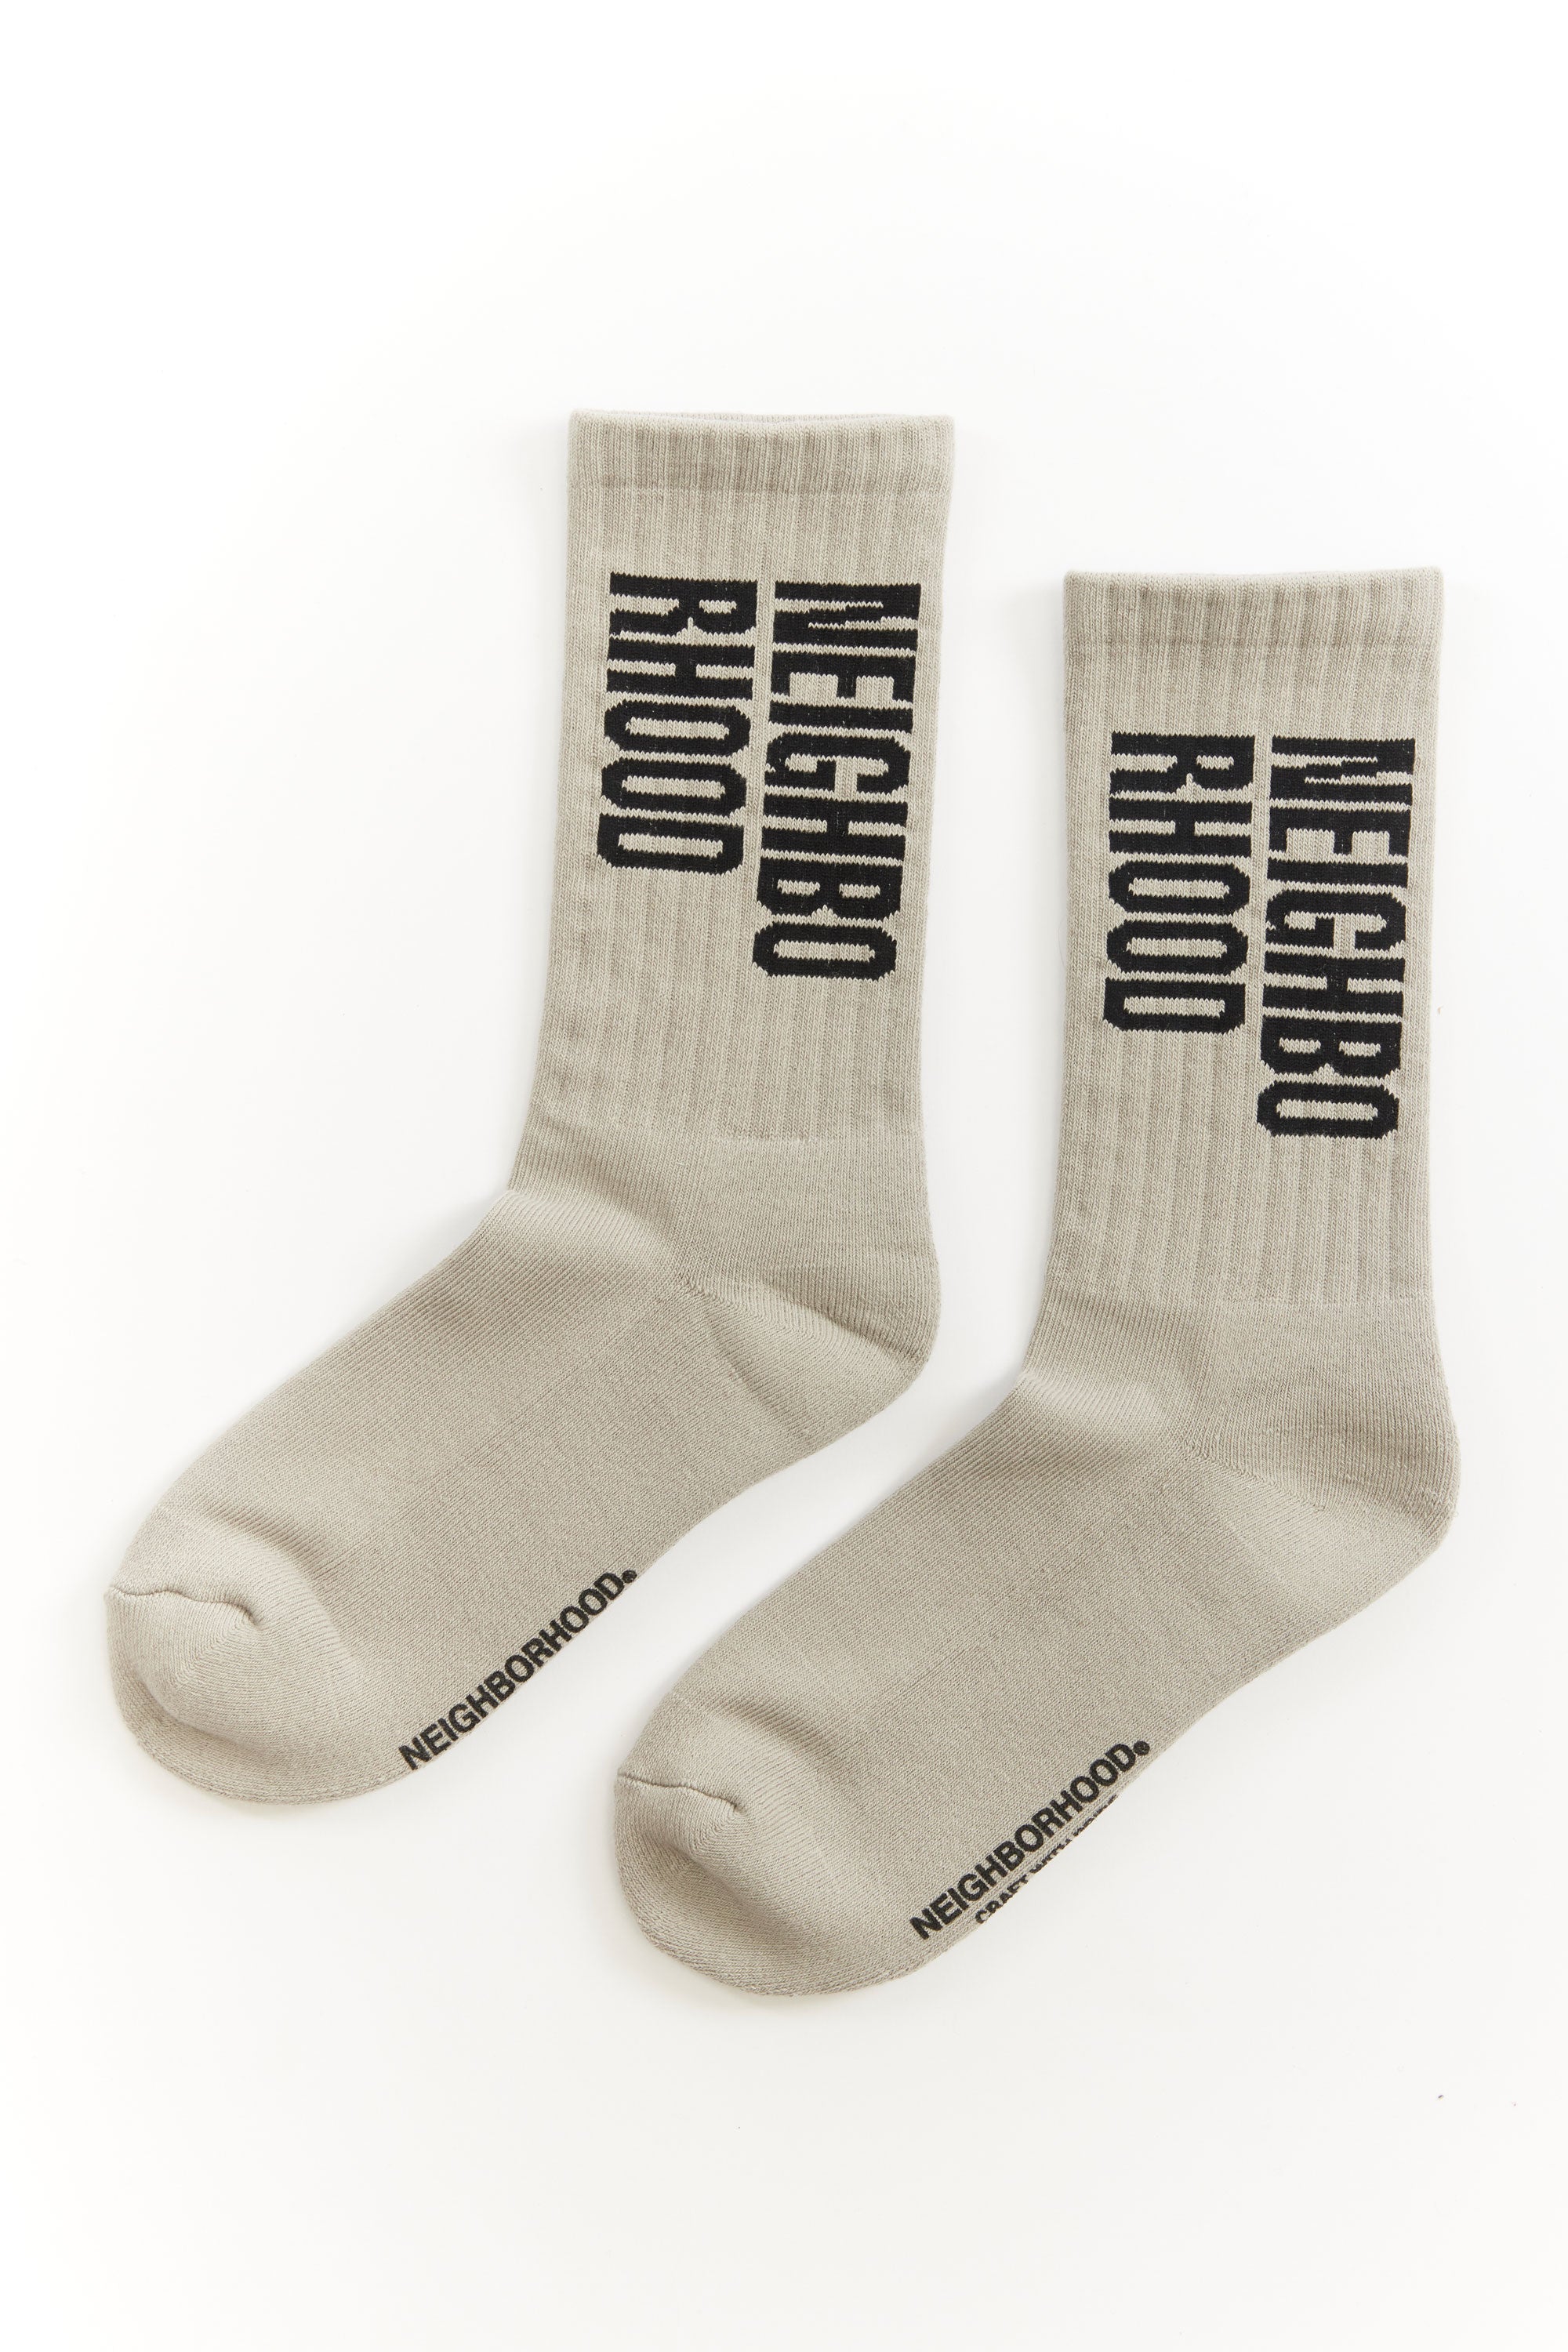 The NEIGHBORHOOD - ID LOGO SOCKS GREY available online with global shipping, and in PAM Stores Melbourne and Sydney.